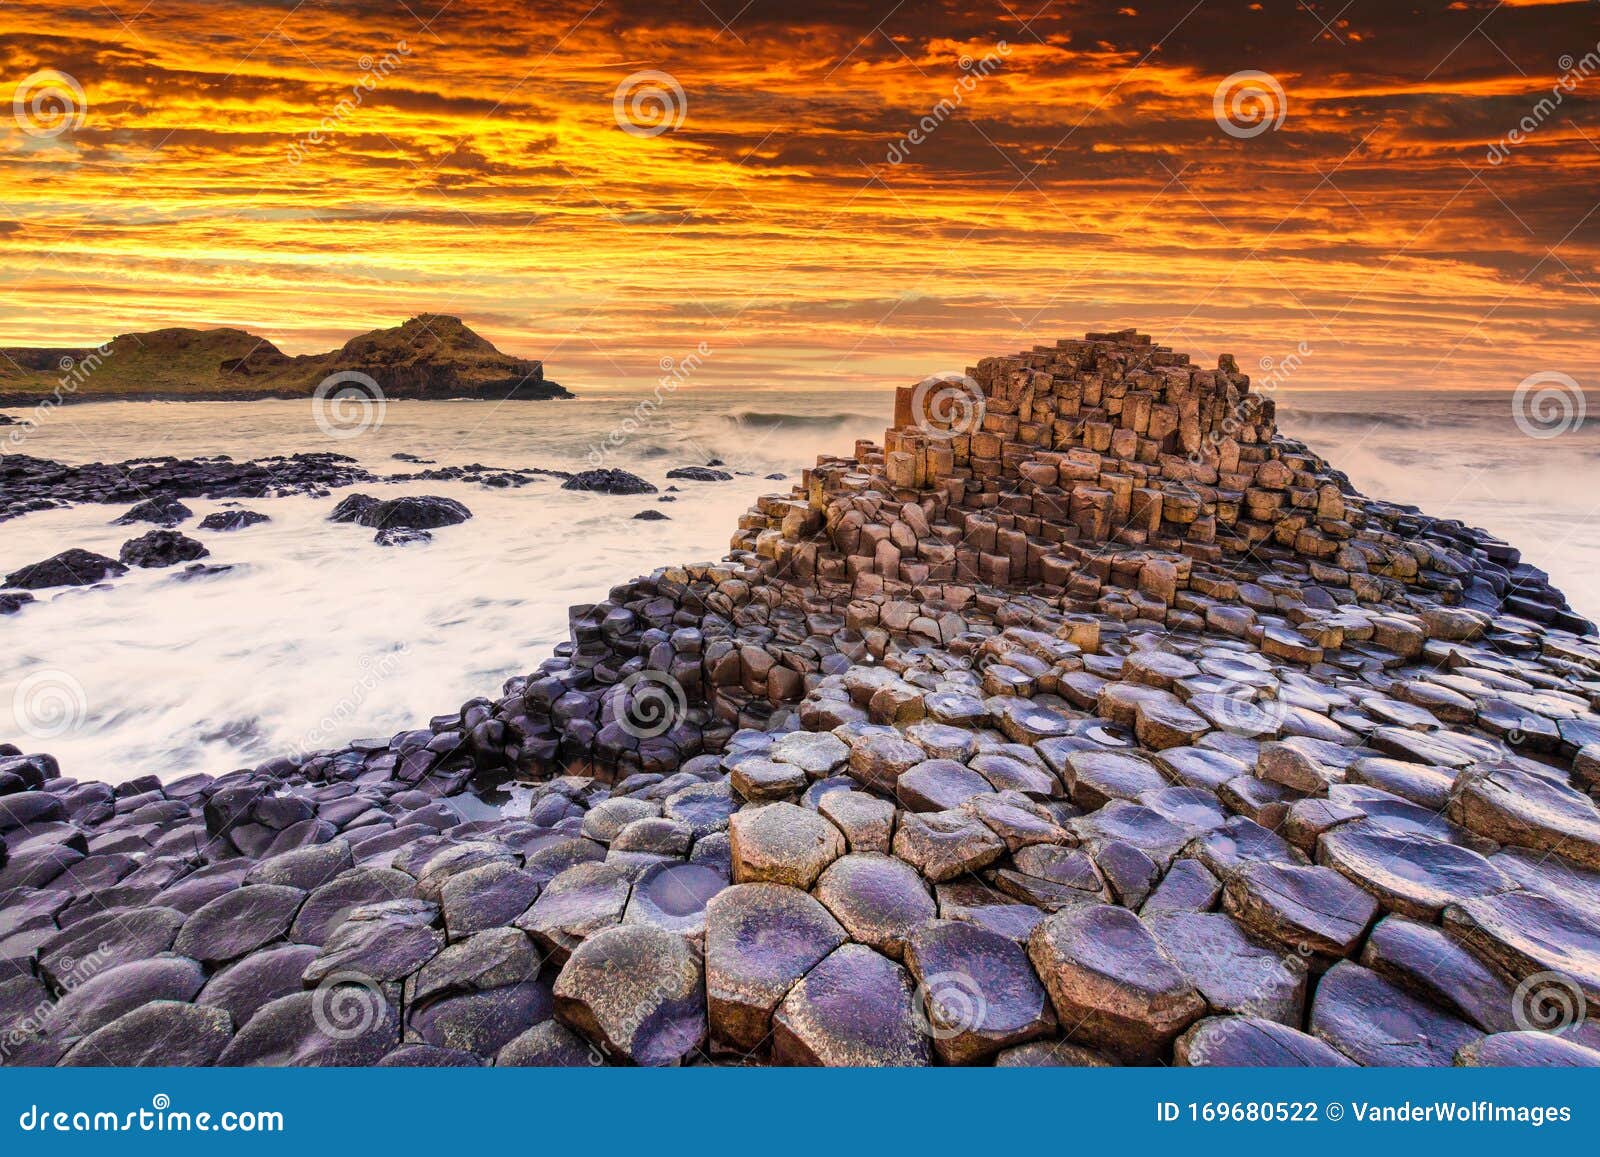 sunset view on the giants causeway in northern ireland